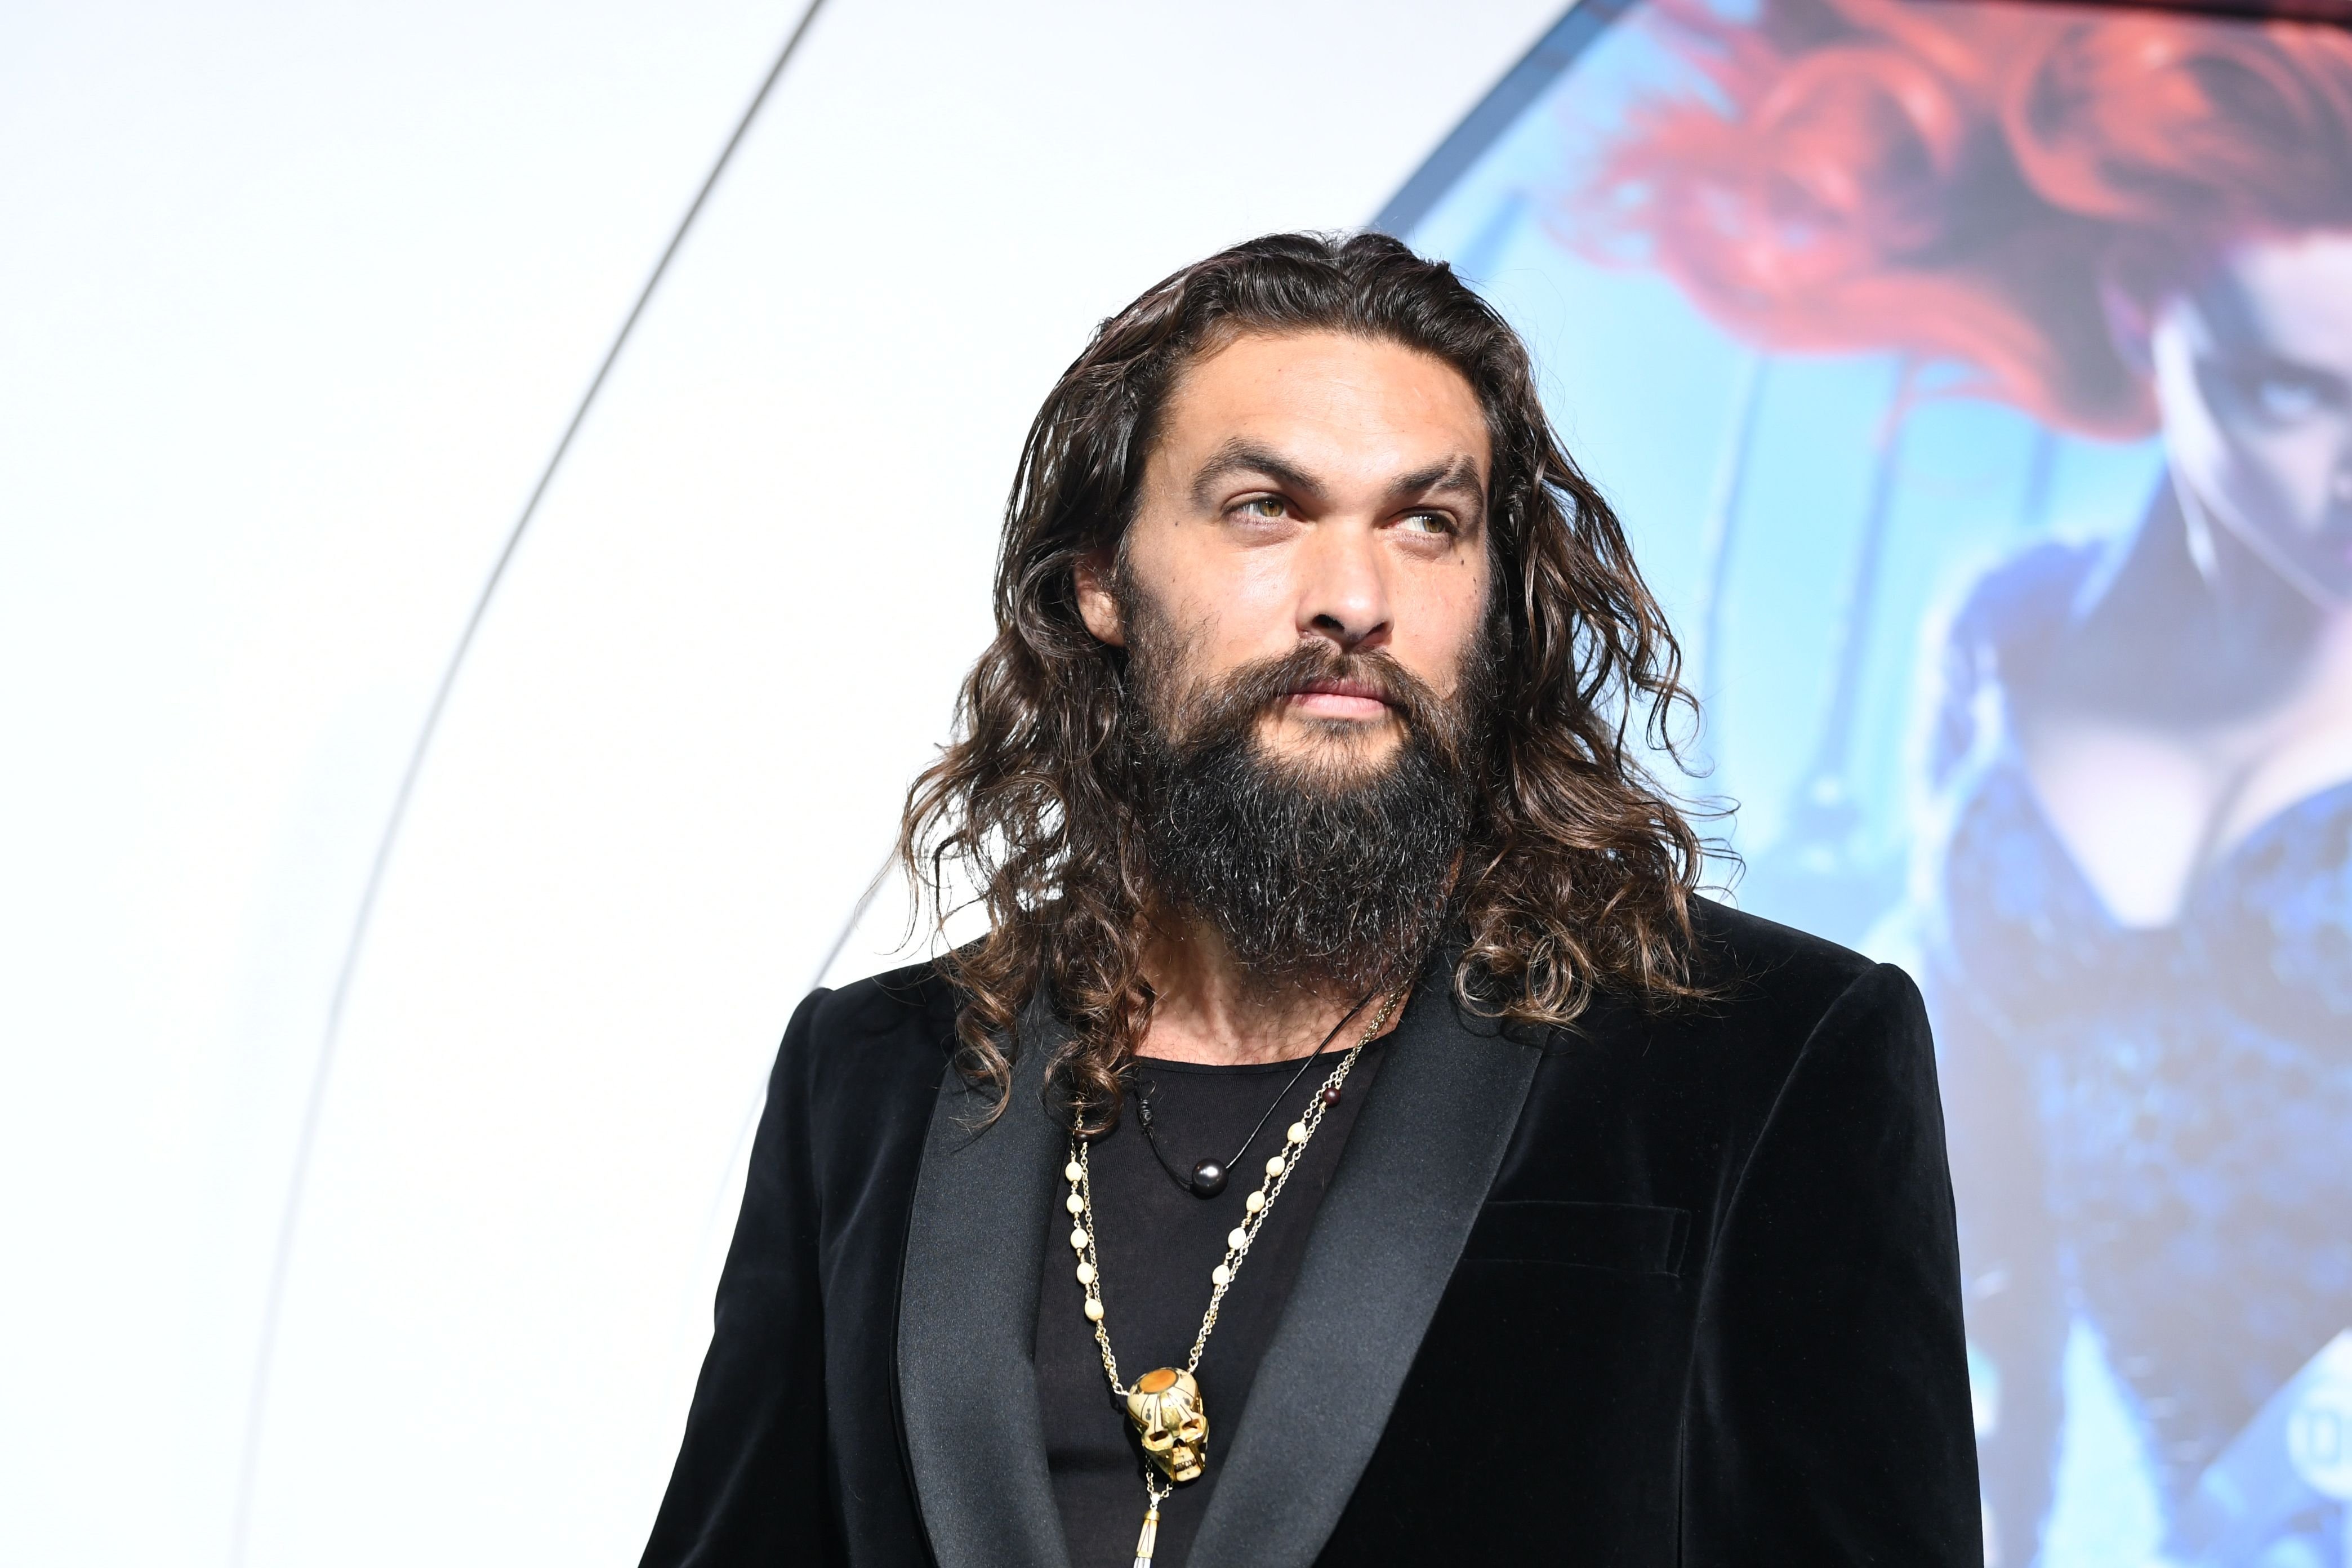 Jason Momoa at the premiere of Warner Bros. Pictures' "Aquaman" at the Chinese Theatre on December 12, 2018 in Los Angeles, California. | Photo: Getty Images